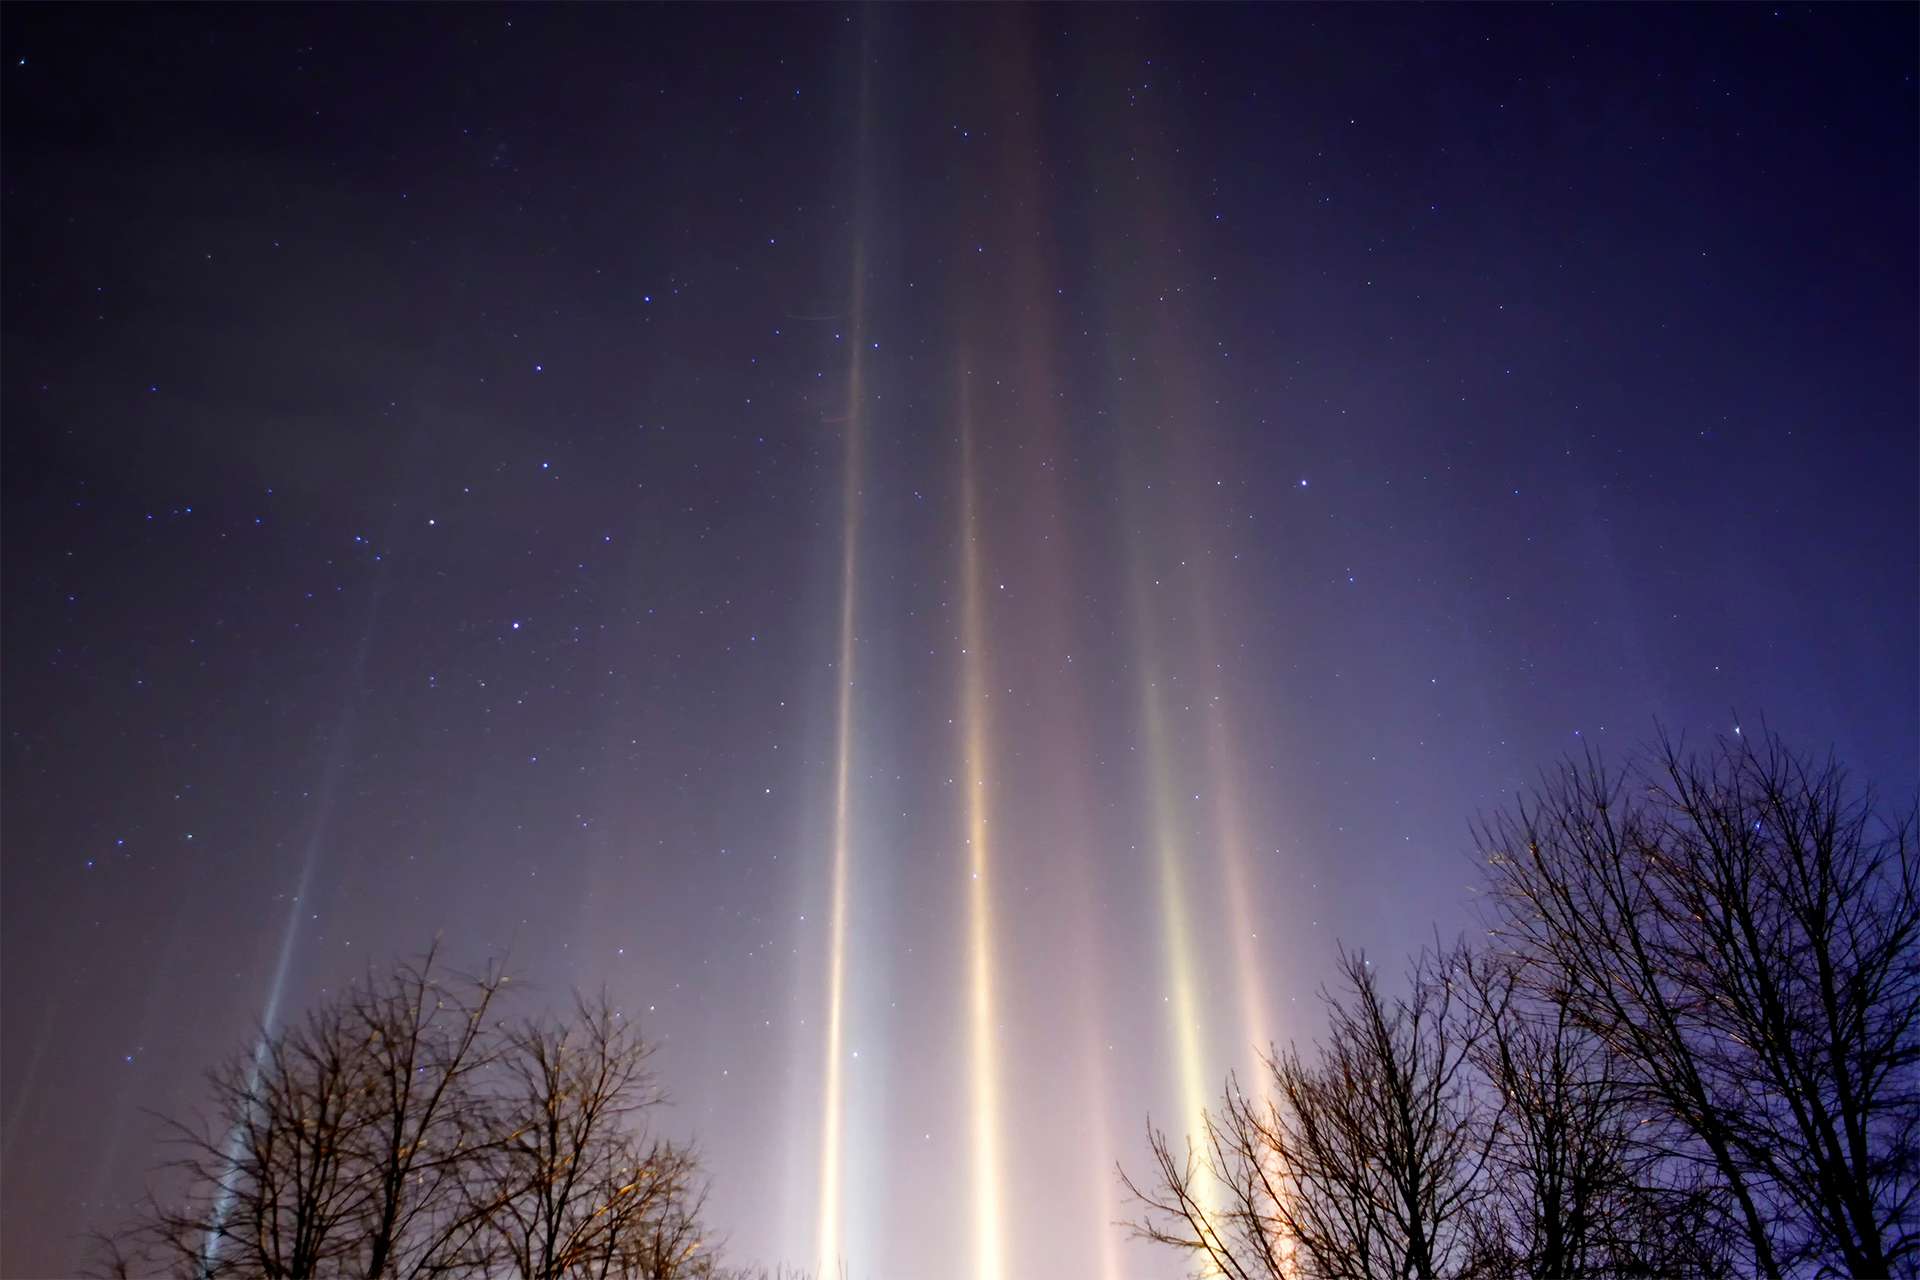 Light Pillars; The lights are from a meteorological condition where ice crystals floating in the air collect and focus the light from artificial sources into "light pillars."